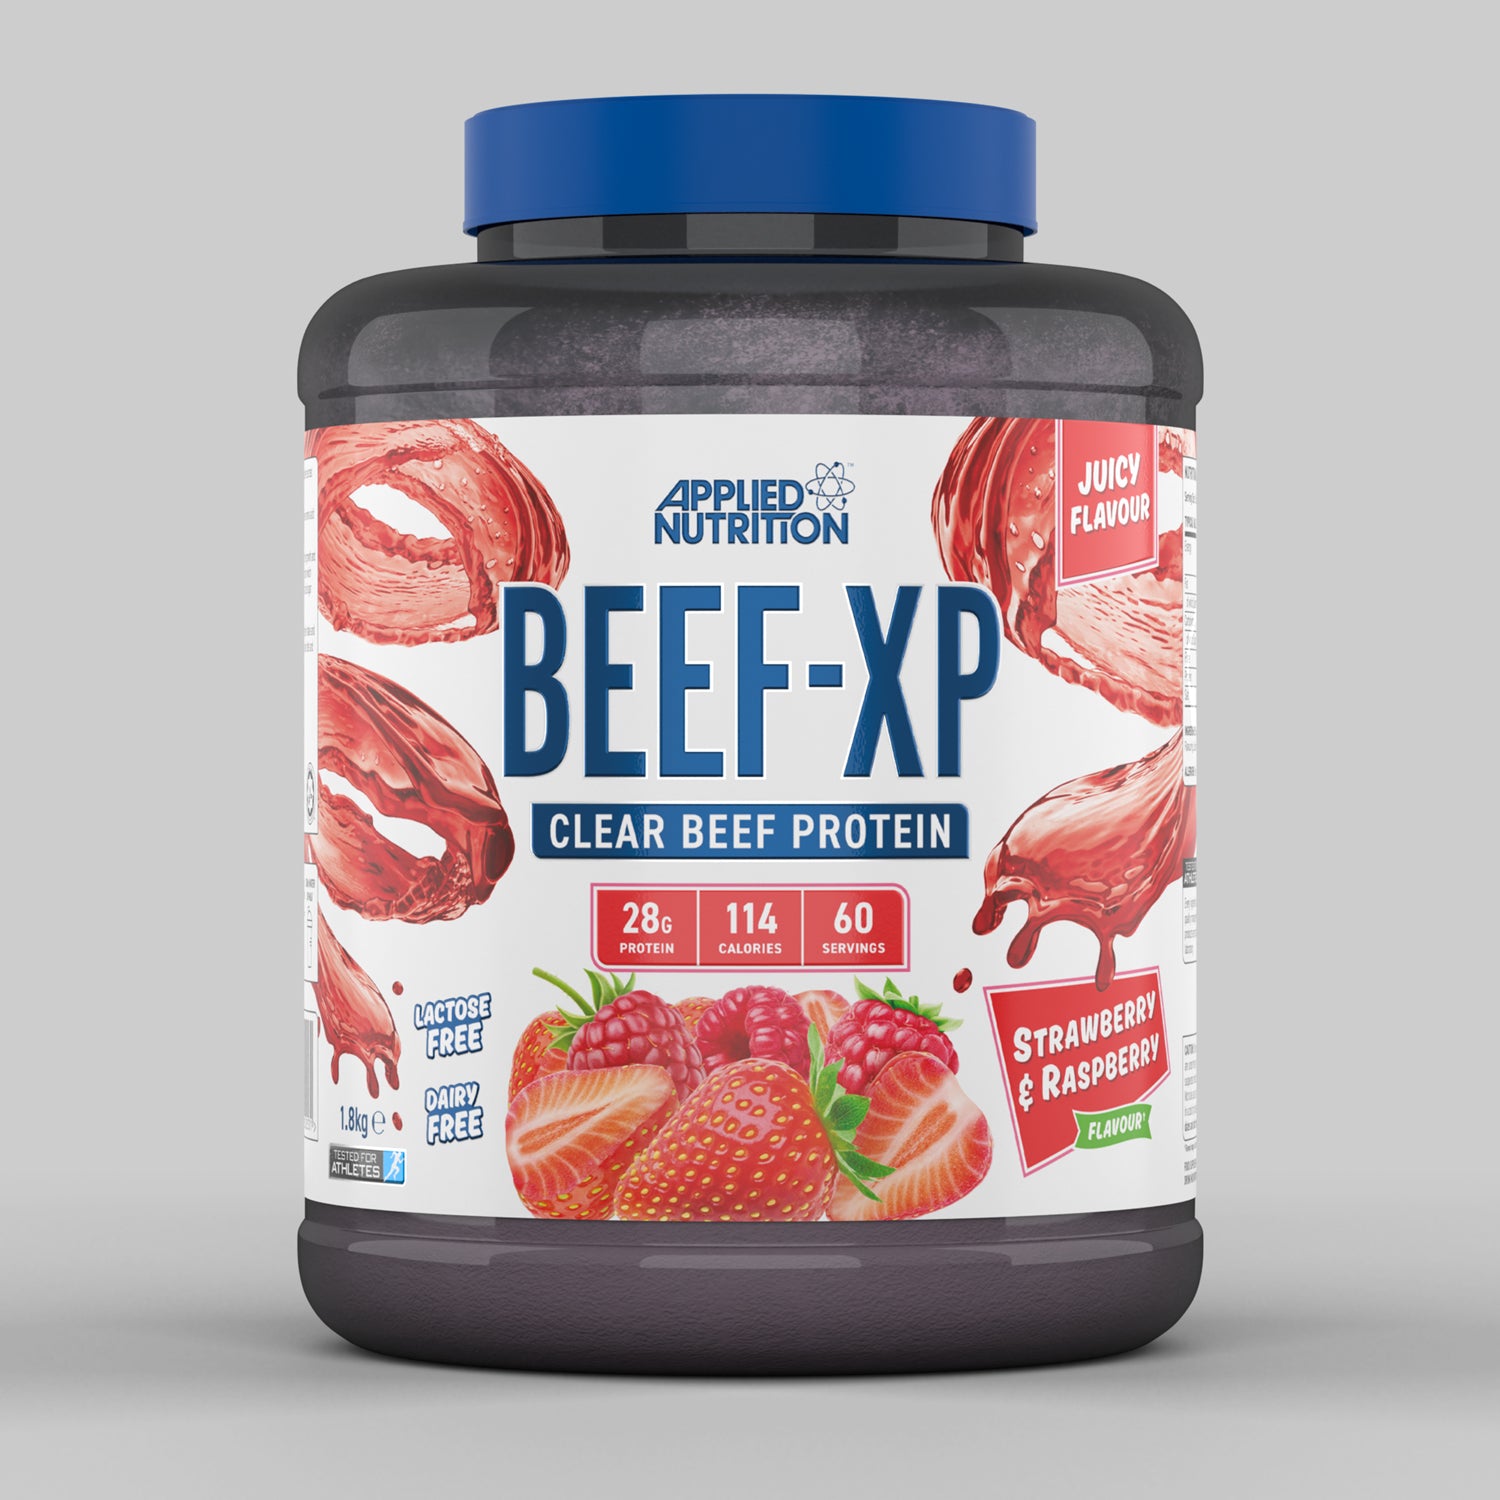 Applied Nutrition Clear Hydrolysed BEEF-XP Protein - Blue Raspberry (1.8kg)